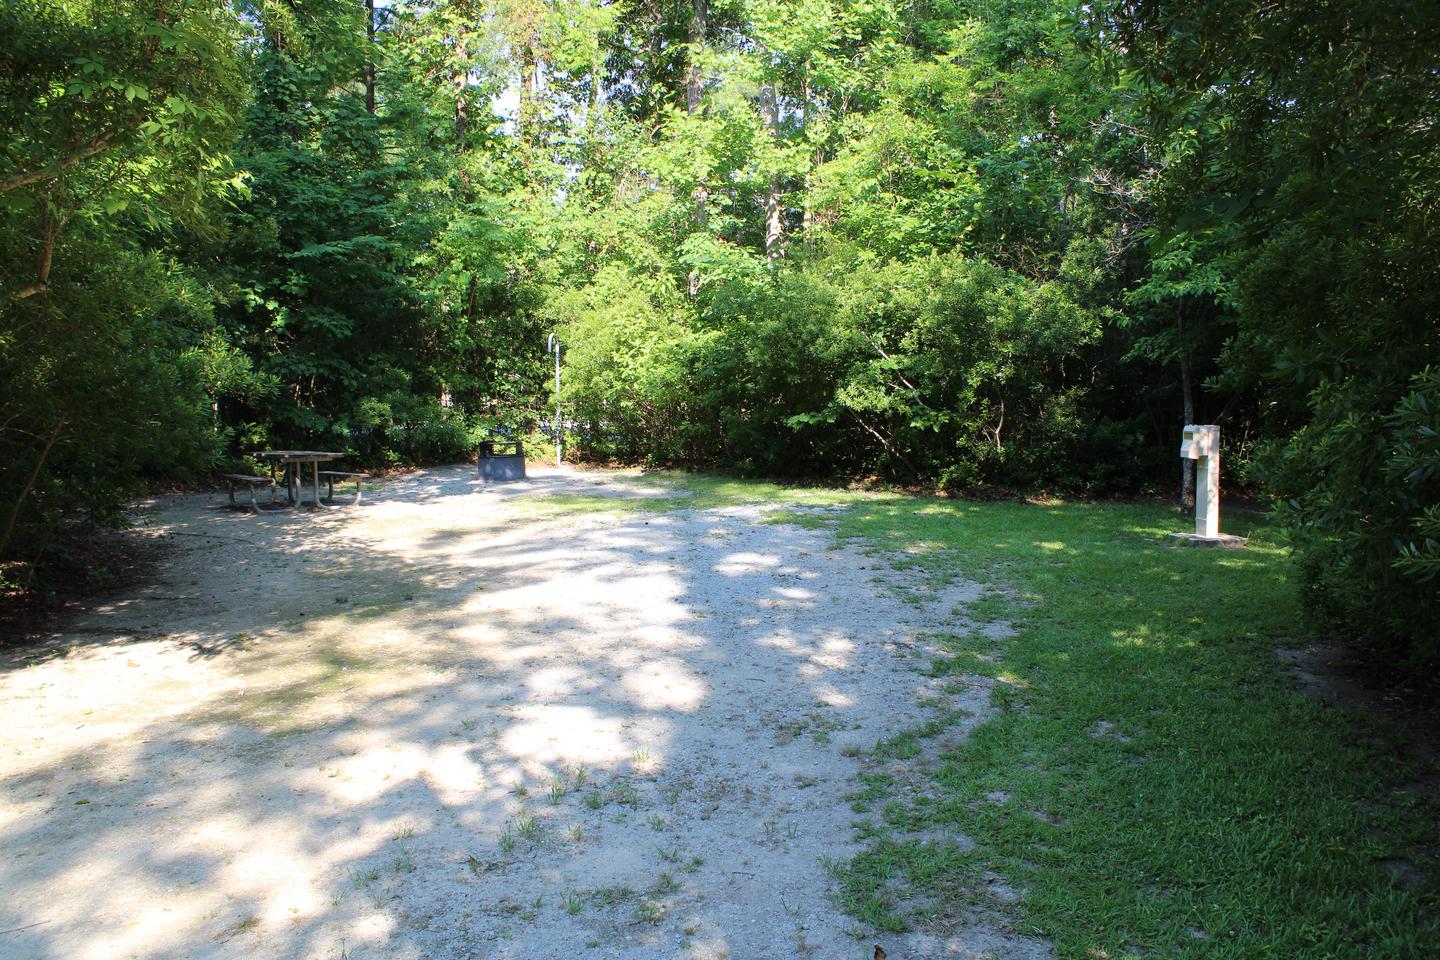 Flanners Beach Campsite #17.Driveway to campsite.